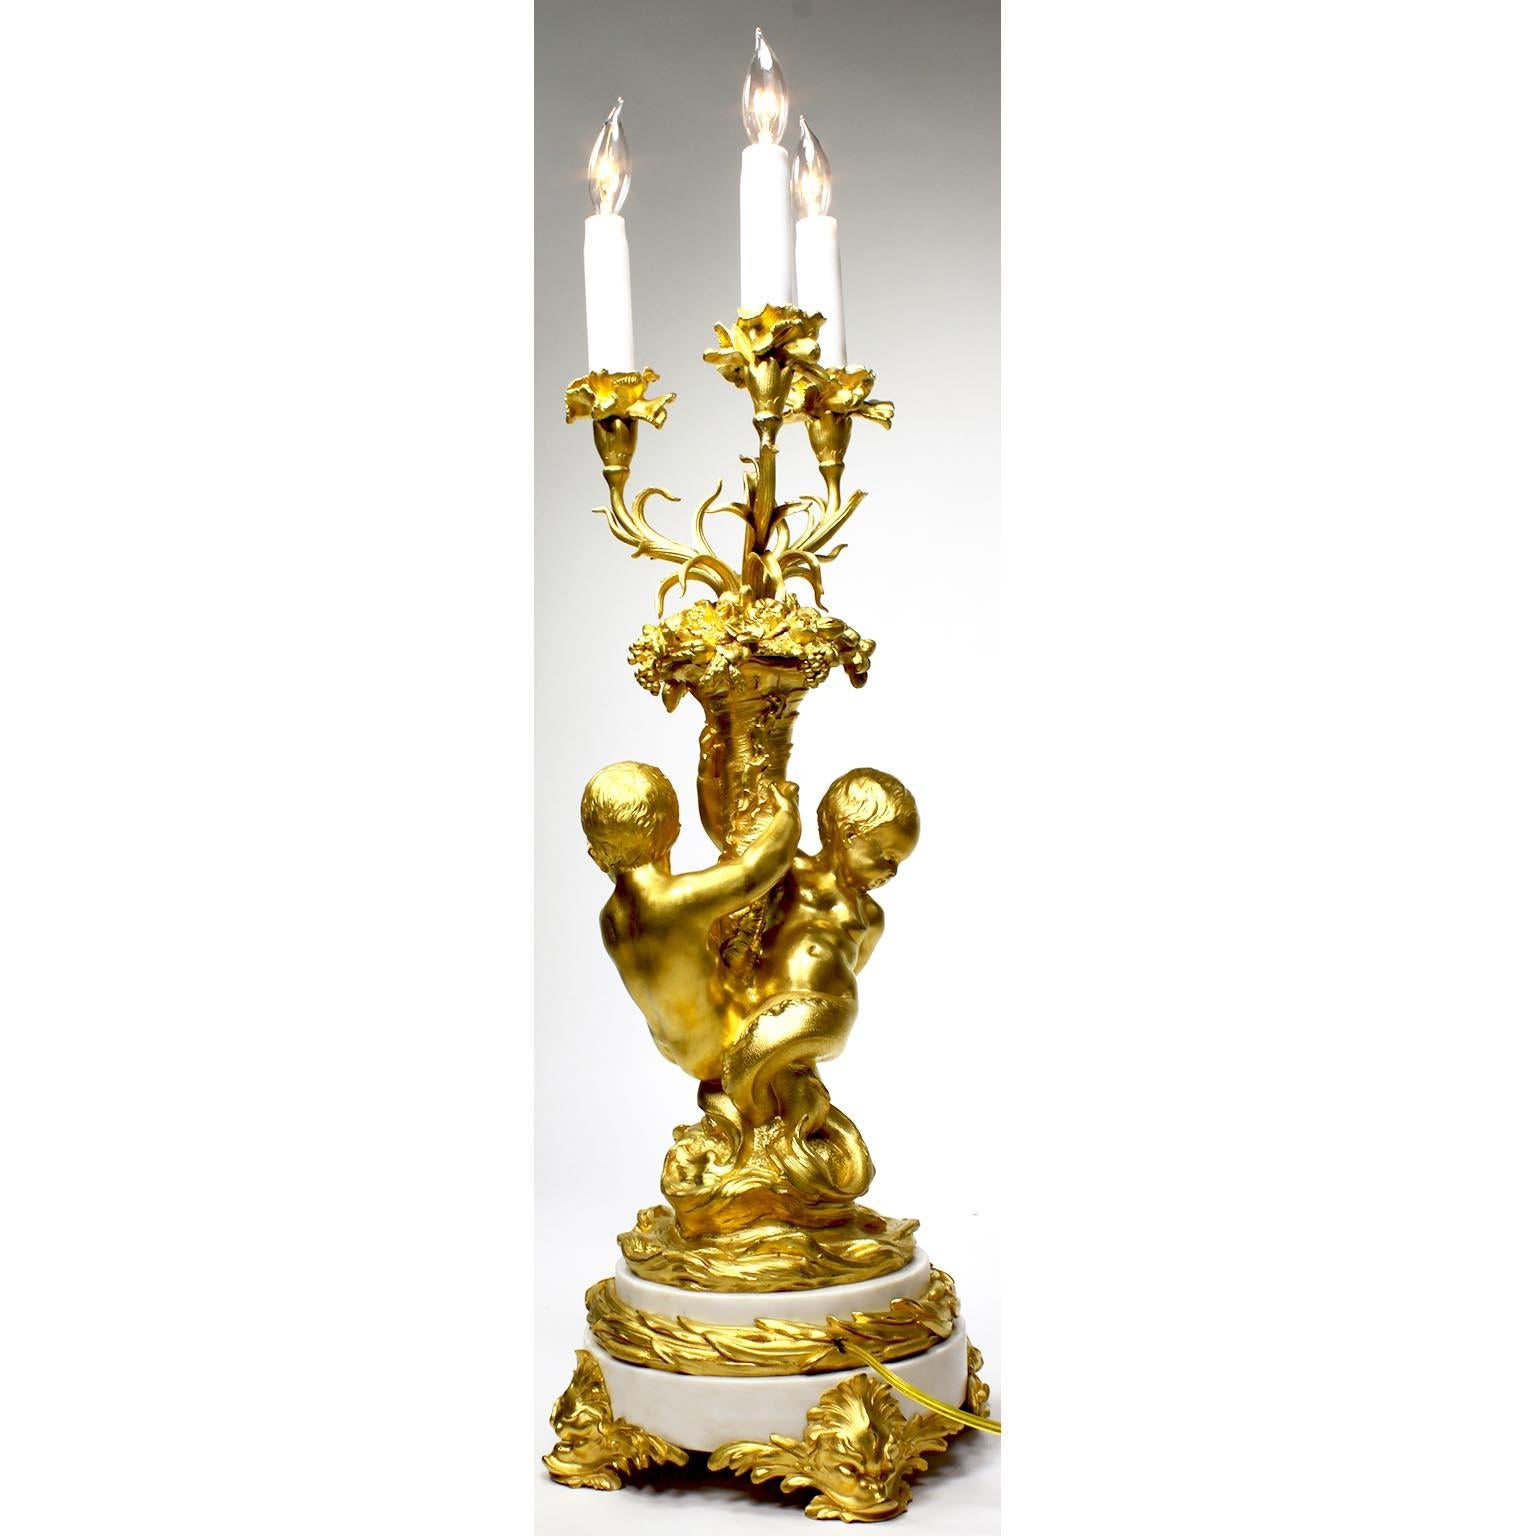 French 19th-20th Century Louis XV Style Ormolu & White Marble Mermaid Candelabra For Sale 4